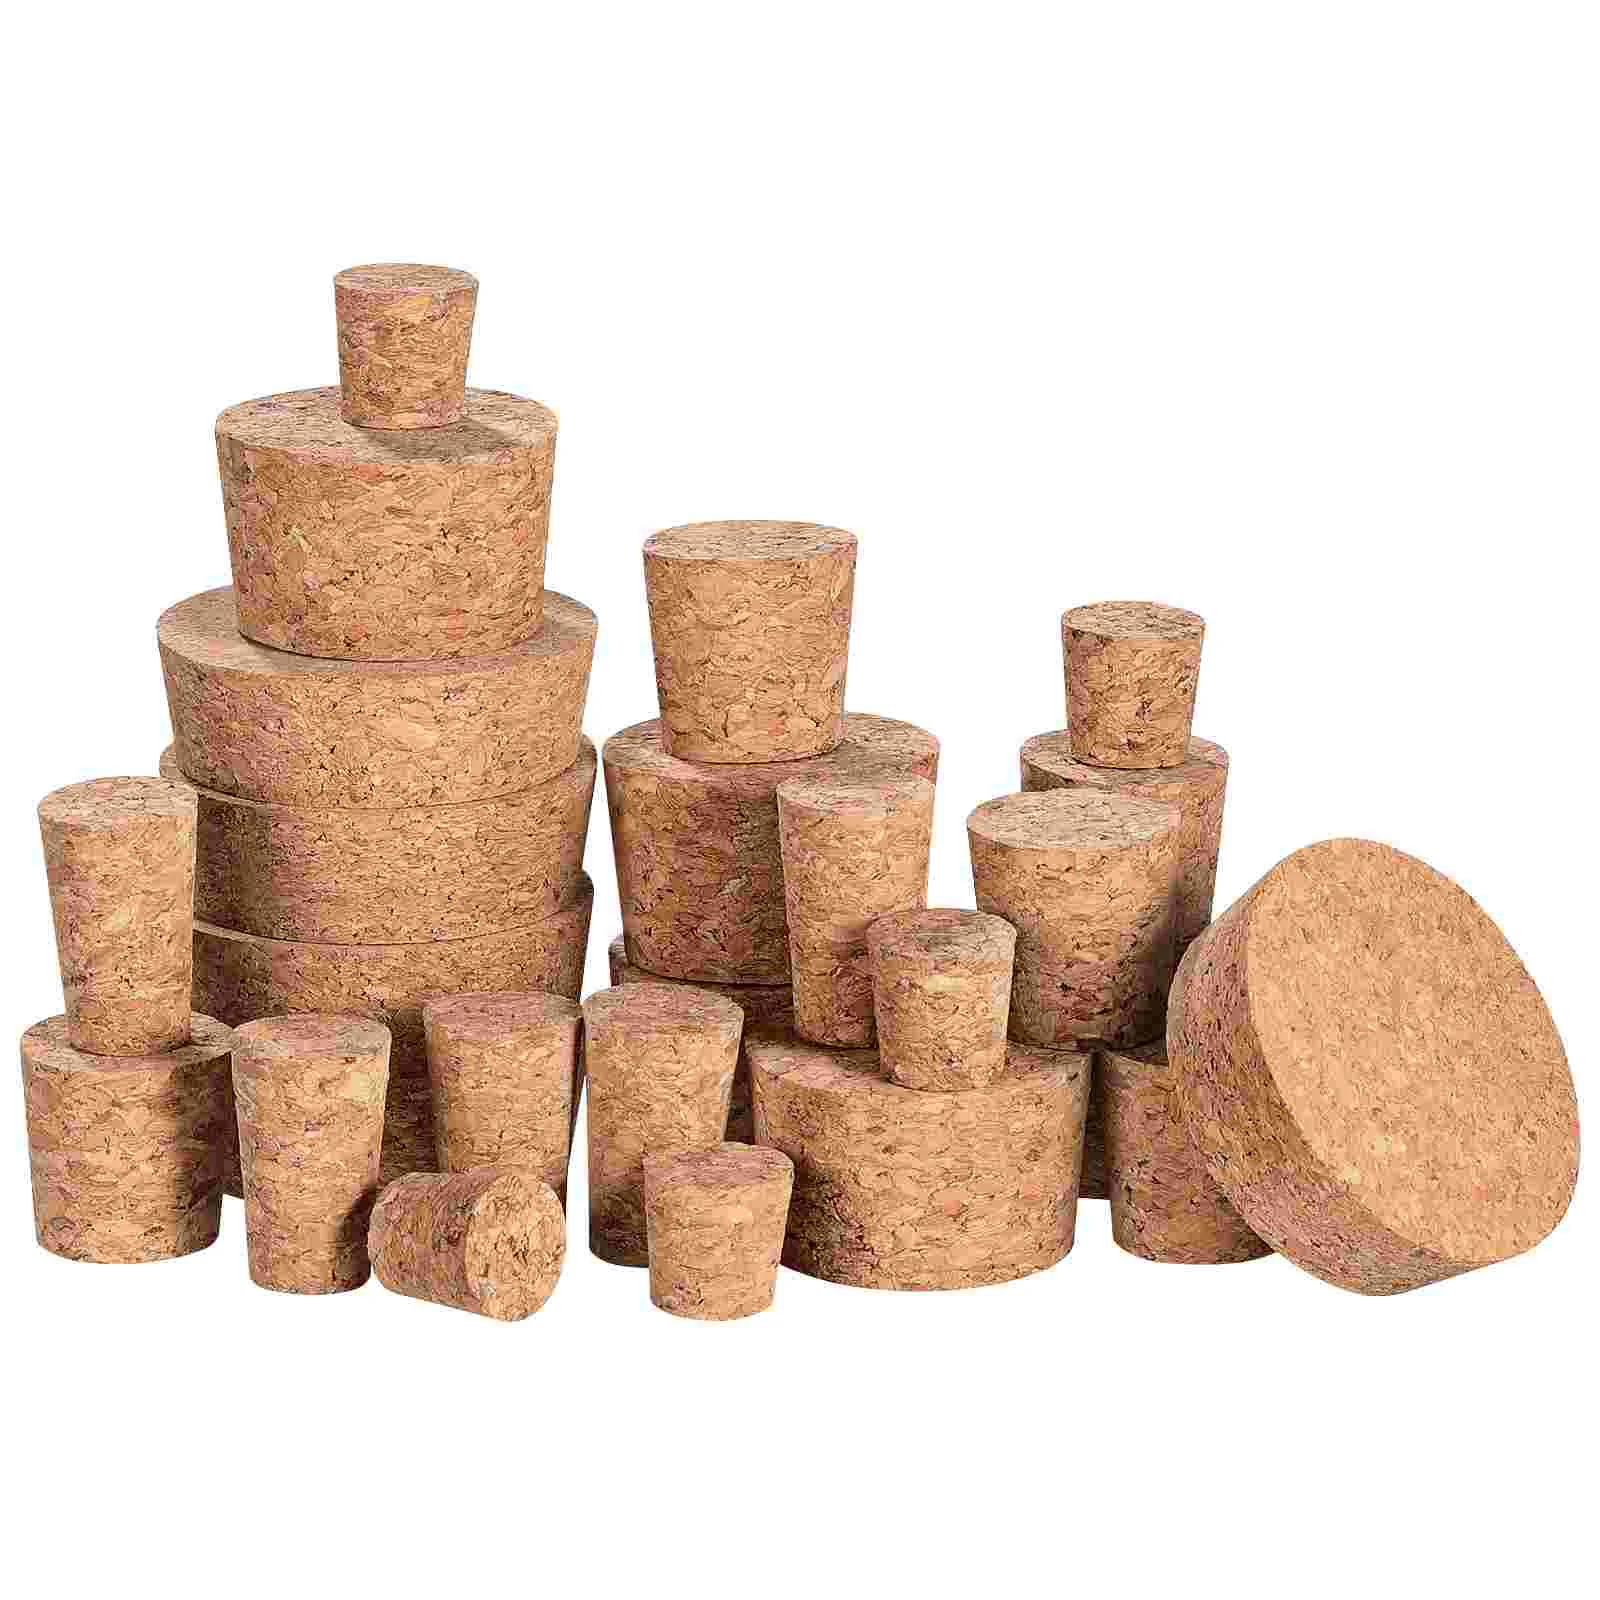 

ARTIBETTER 25pcs Cork Stoppers Bottle Plugs Tapered Bottle Stoppers Replacement Corks for Beer Bottles